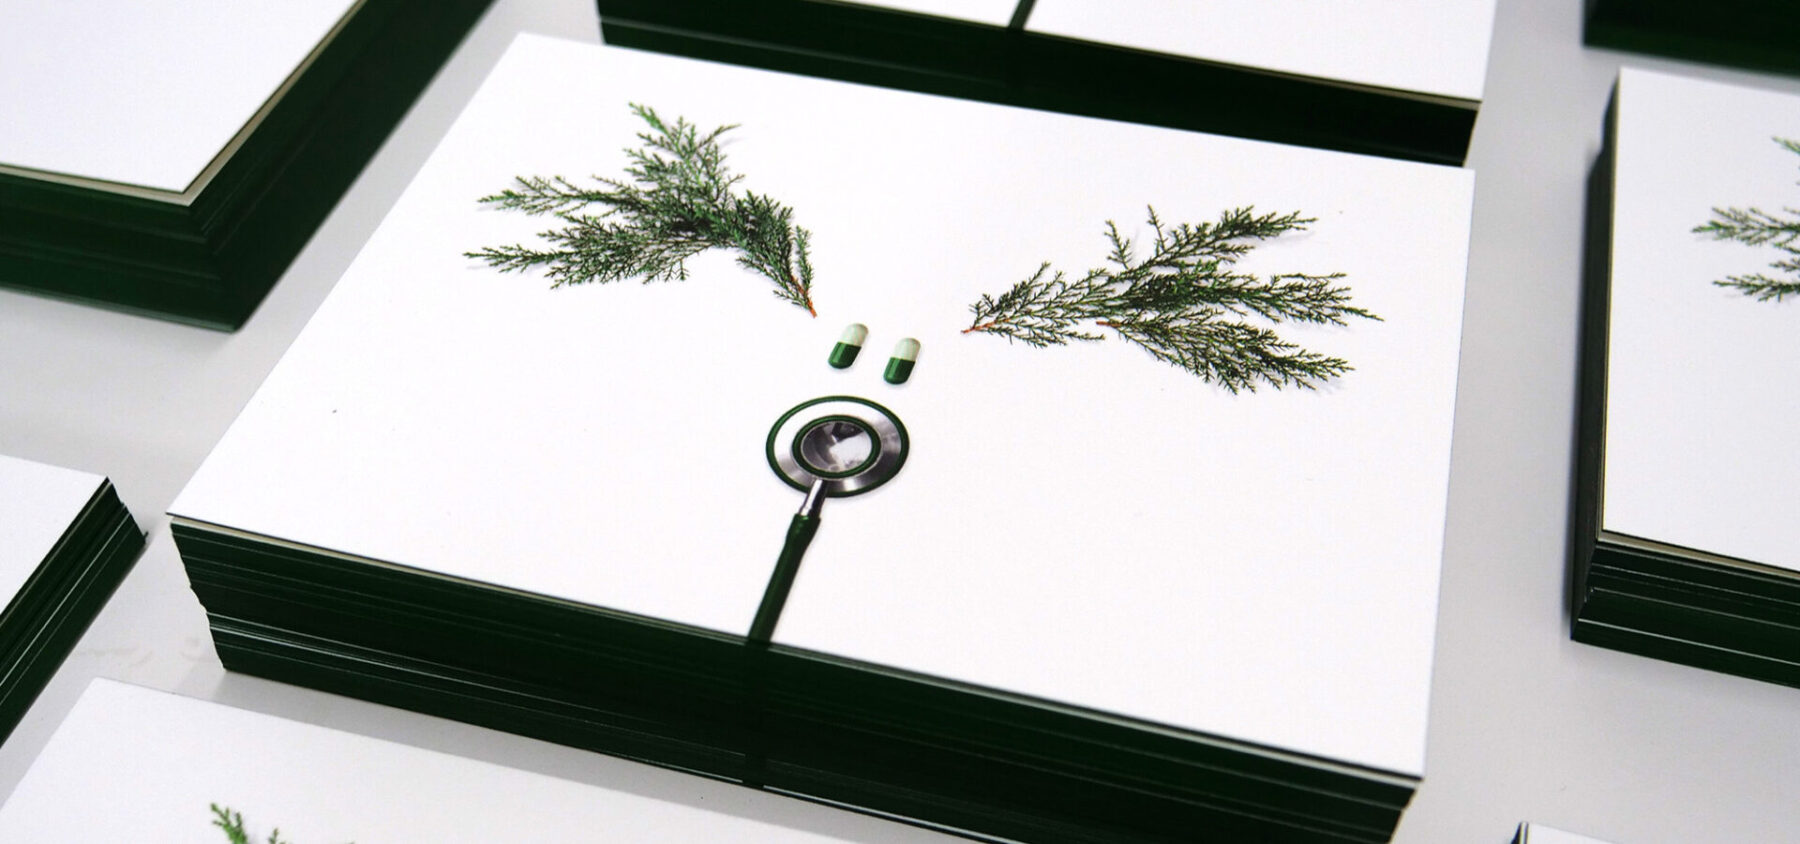 Stacks of holiday postcards with design of reindeer created from a stethoscope, two pills and some evergreen branches